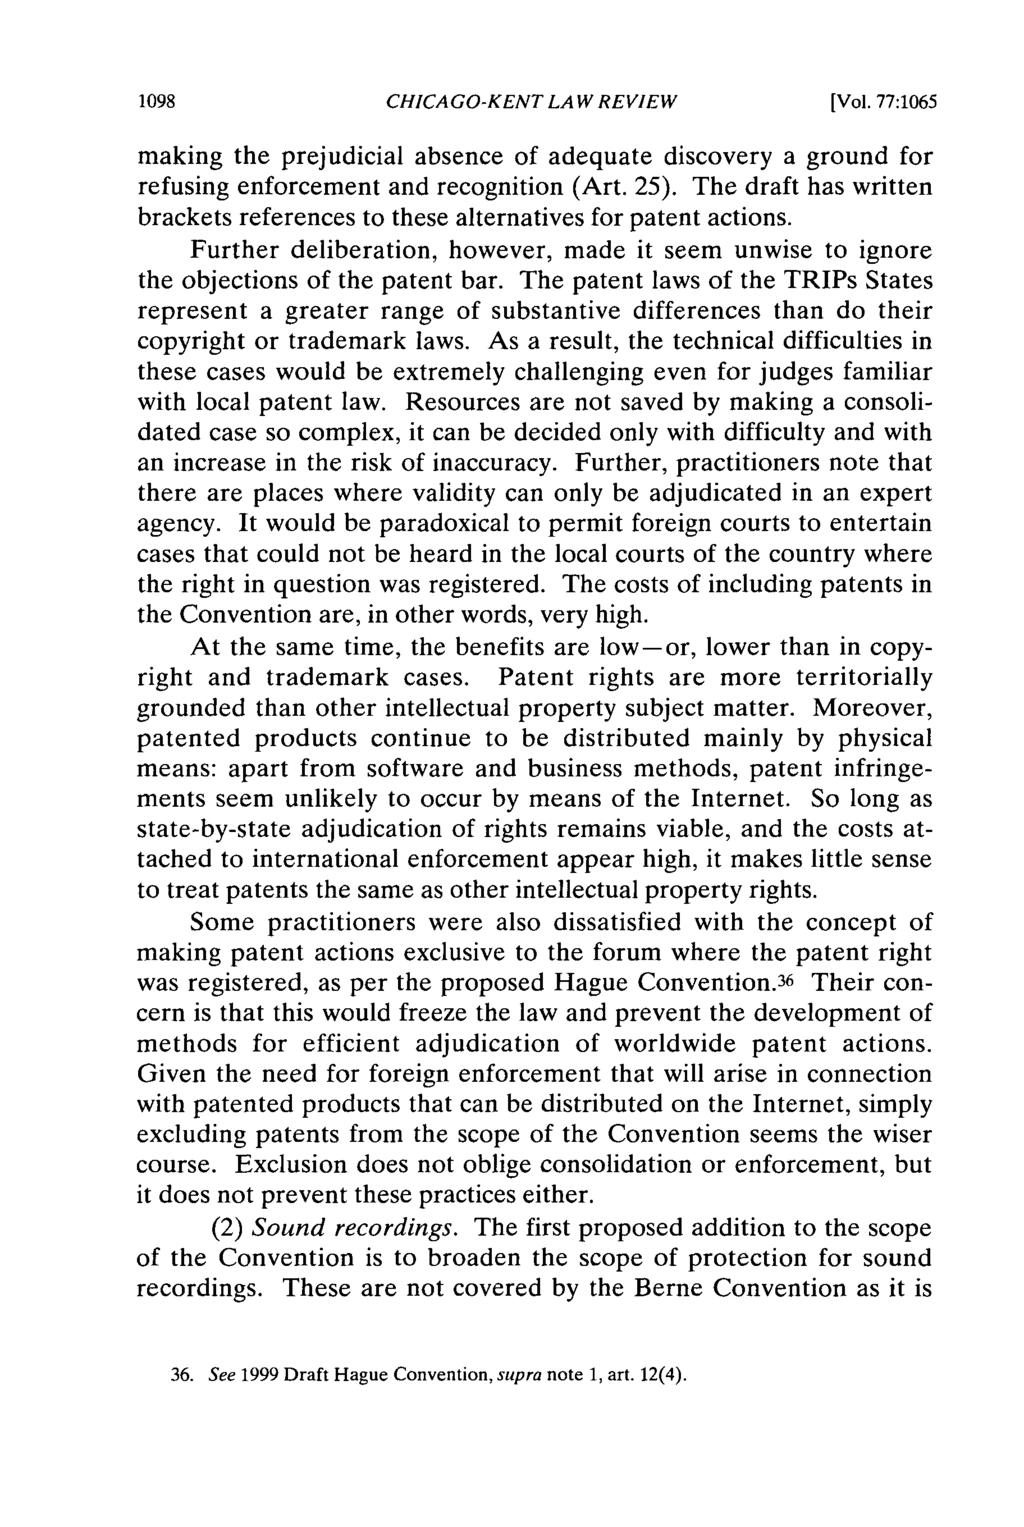 CHICAGO-KENT LA W REVIEW [Vol. 77:1065 making the prejudicial absence of adequate discovery a ground for refusing enforcement and recognition (Art. 25).